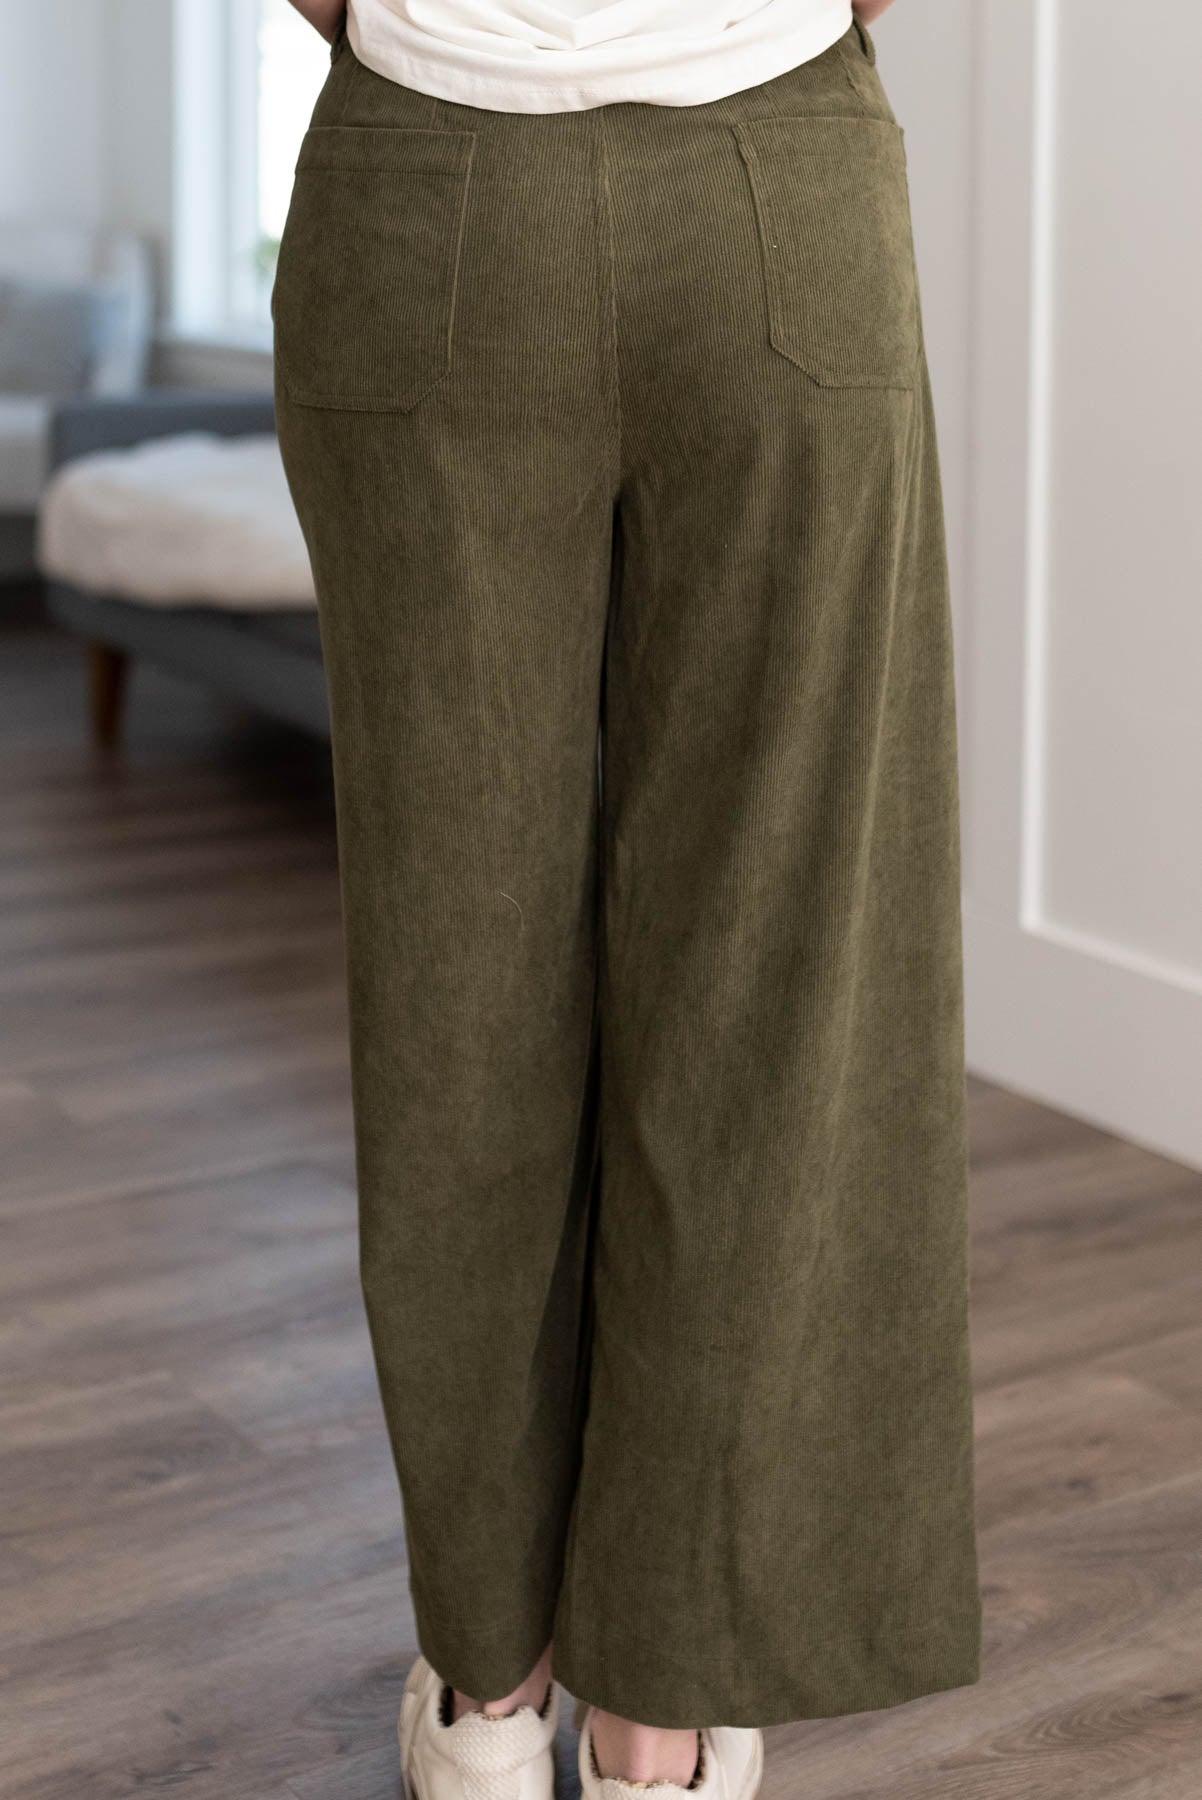 Back view of the olive corduroy pants